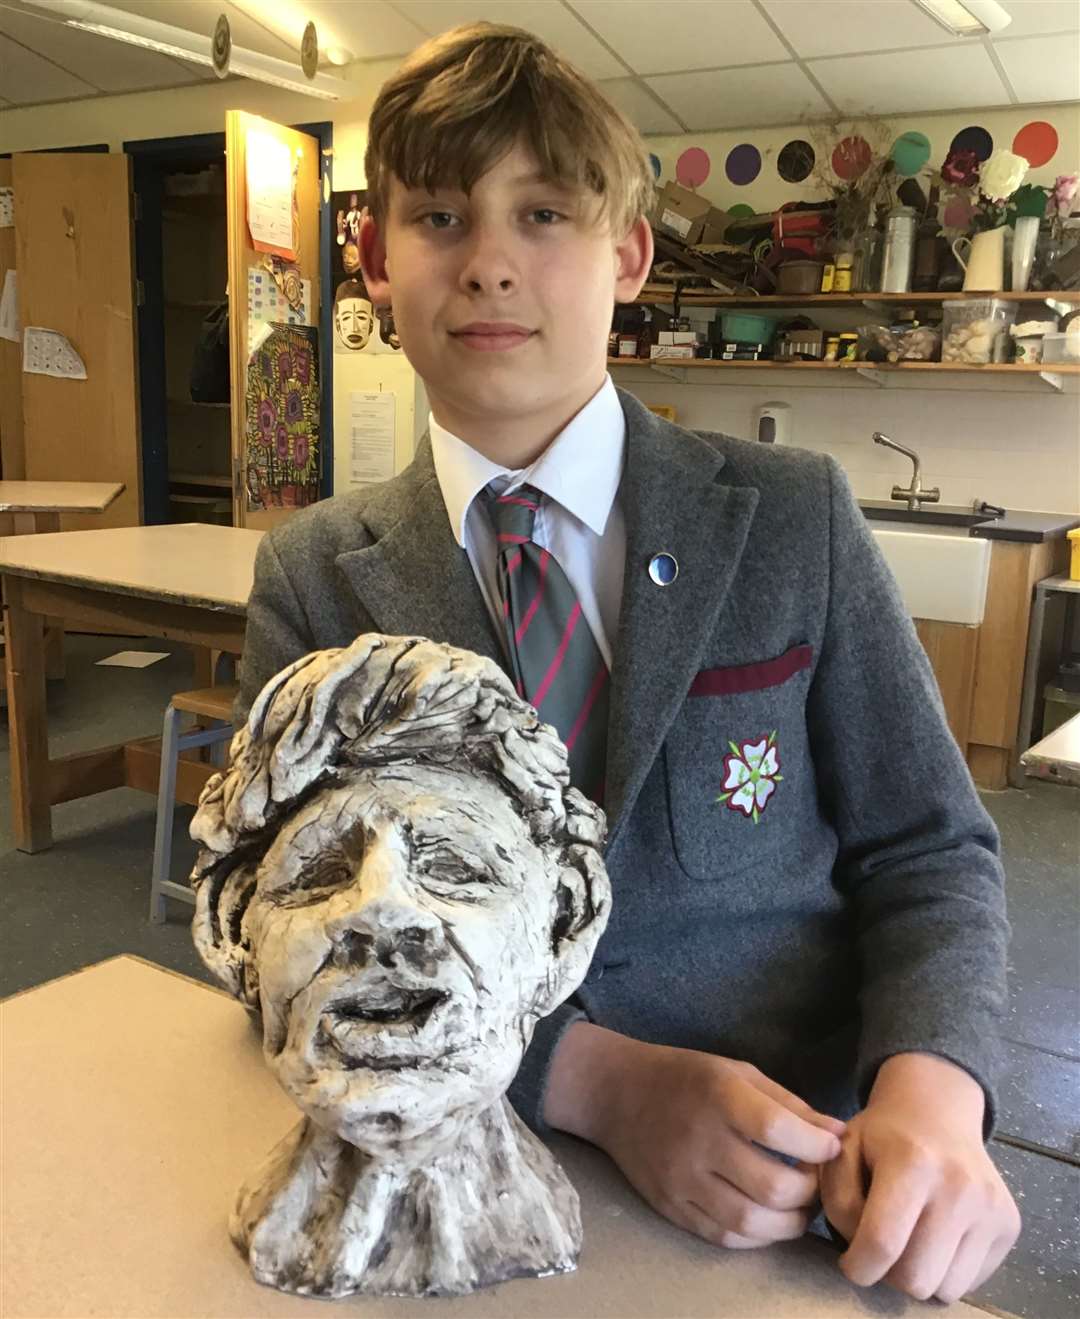 Seb Ford, 12, with his work